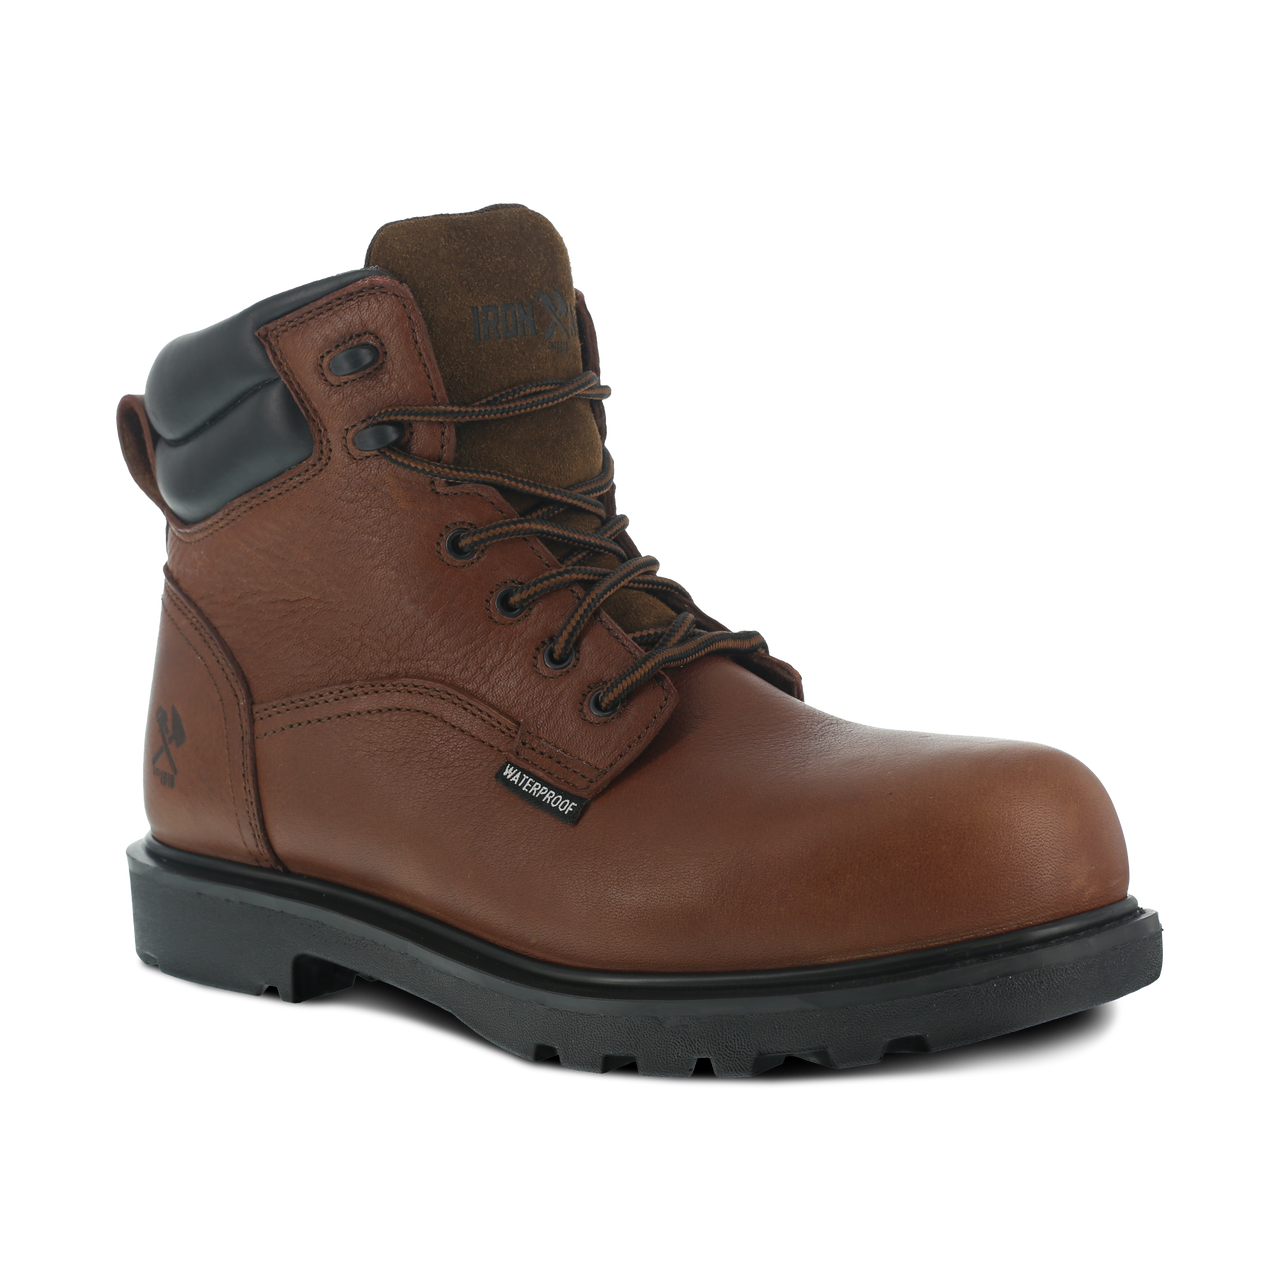 Iron Age Footwear - Tough Work Boots - Steel Toe, Construction & More